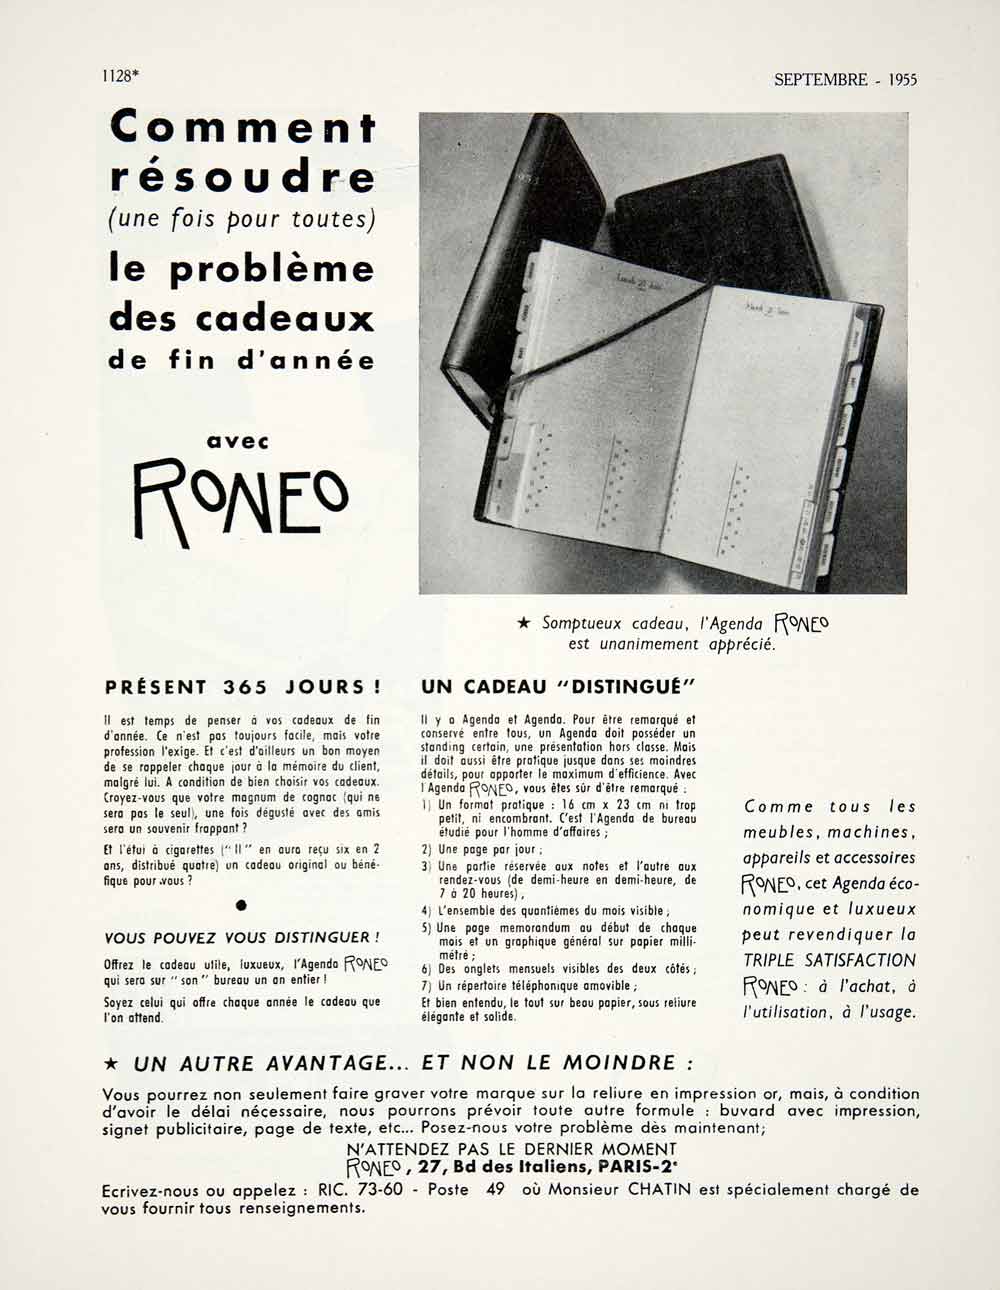 1955 Ad Roneo French Advertisement Planner Daily Notebook Present Paris VEN2